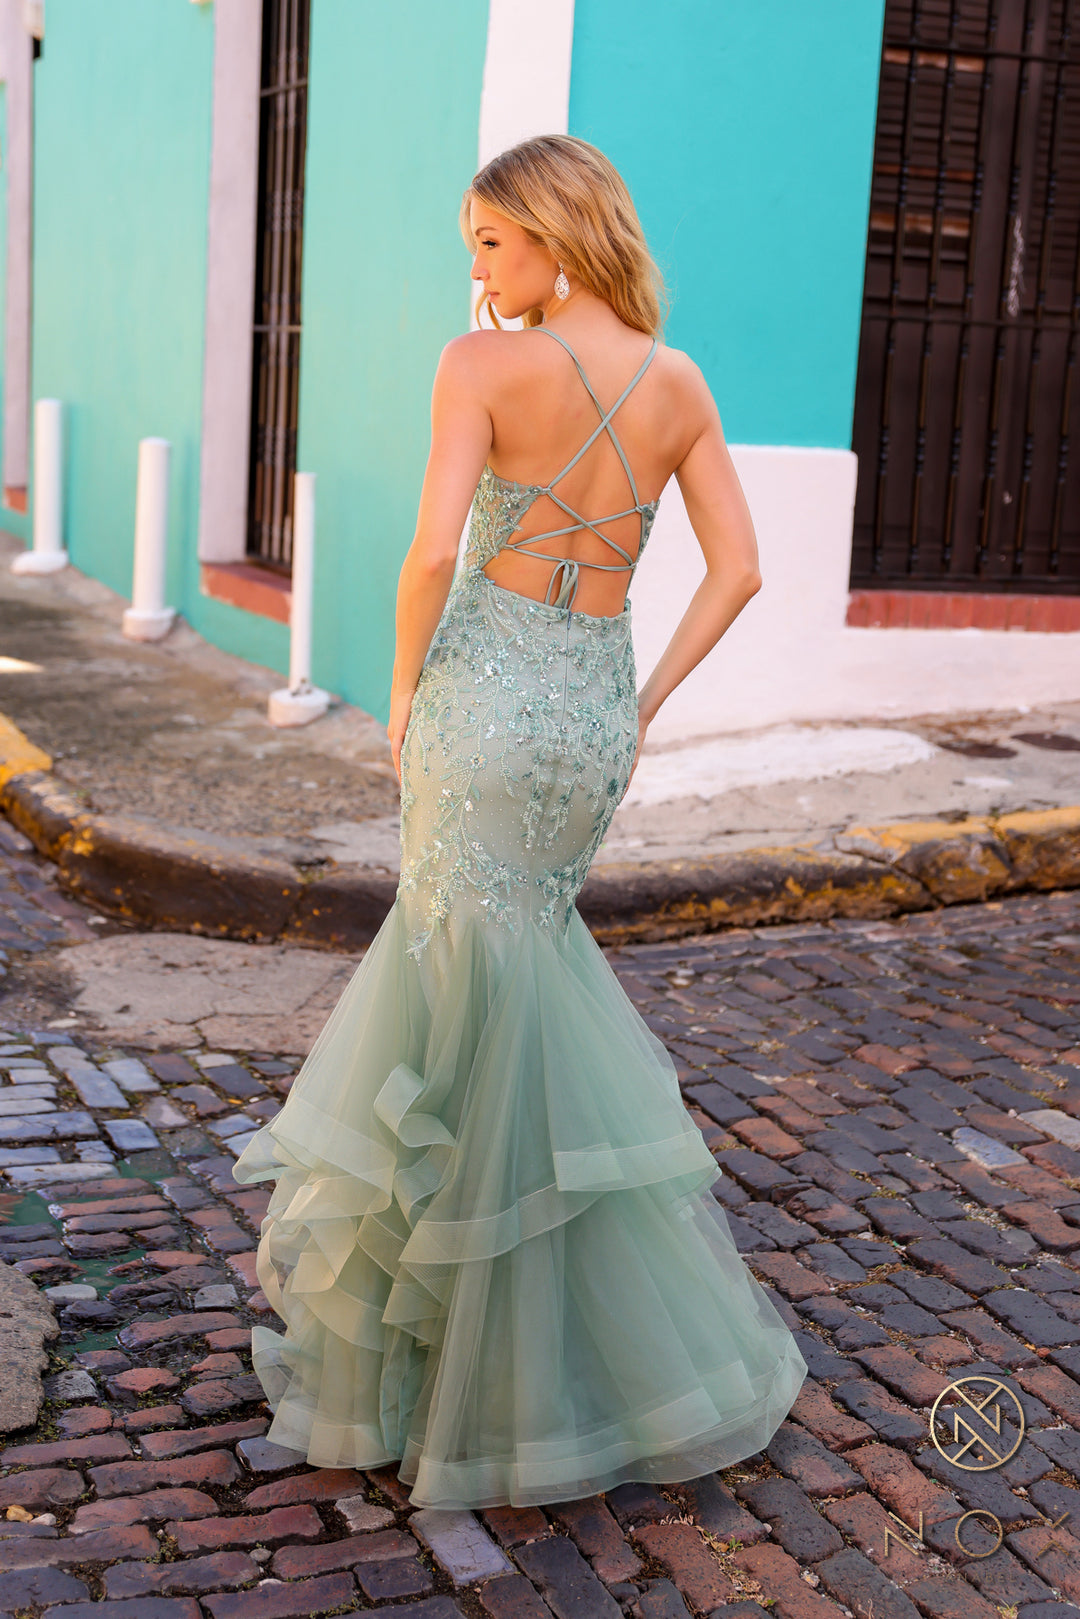 Applique V-Neck Layered Mermaid Dress by Nox Anabel G1368